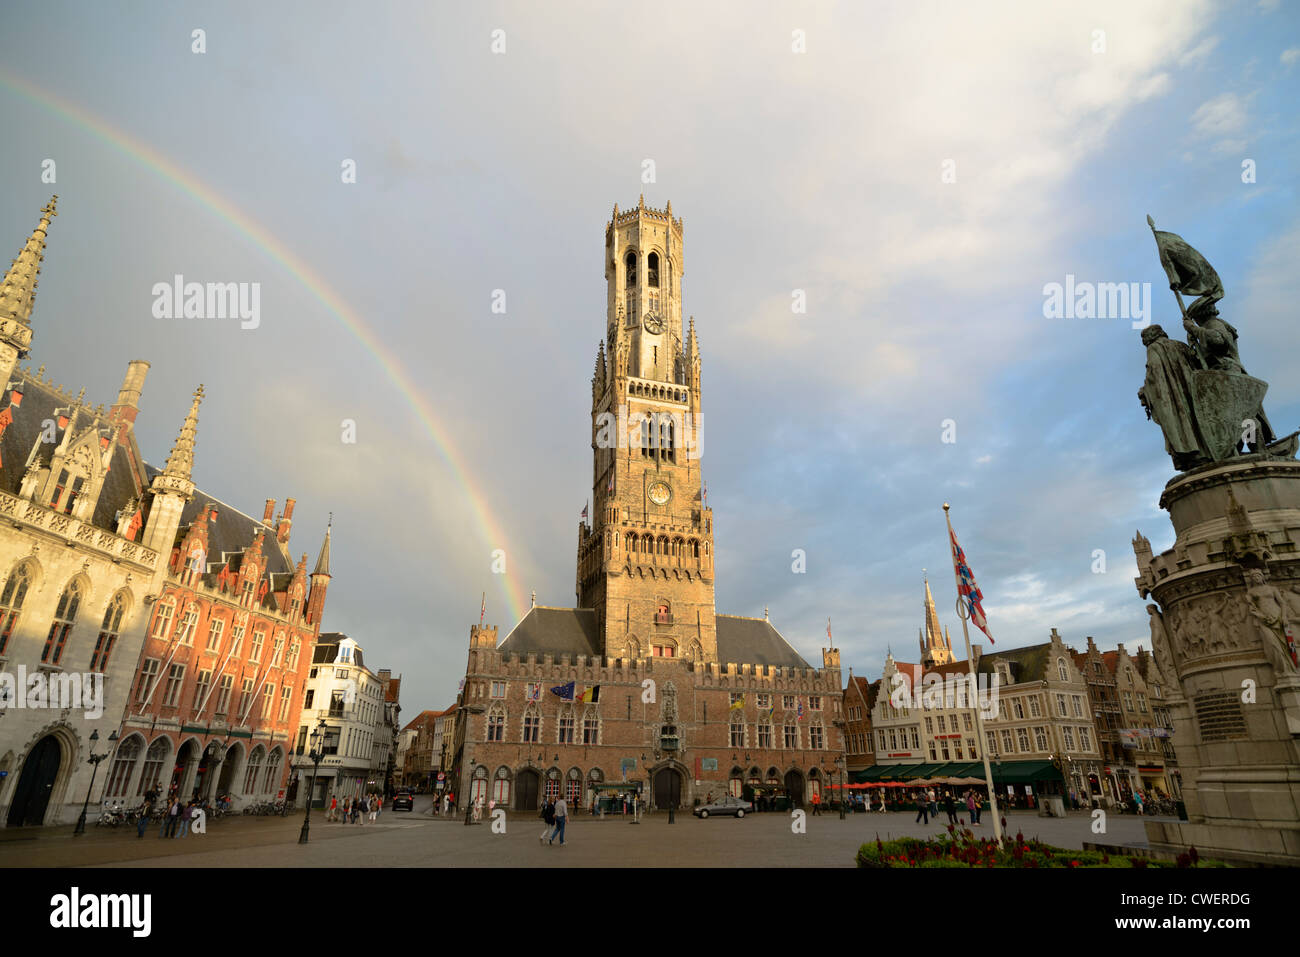 Belfry and Market Square, Bruges,Belgium Stock Photo